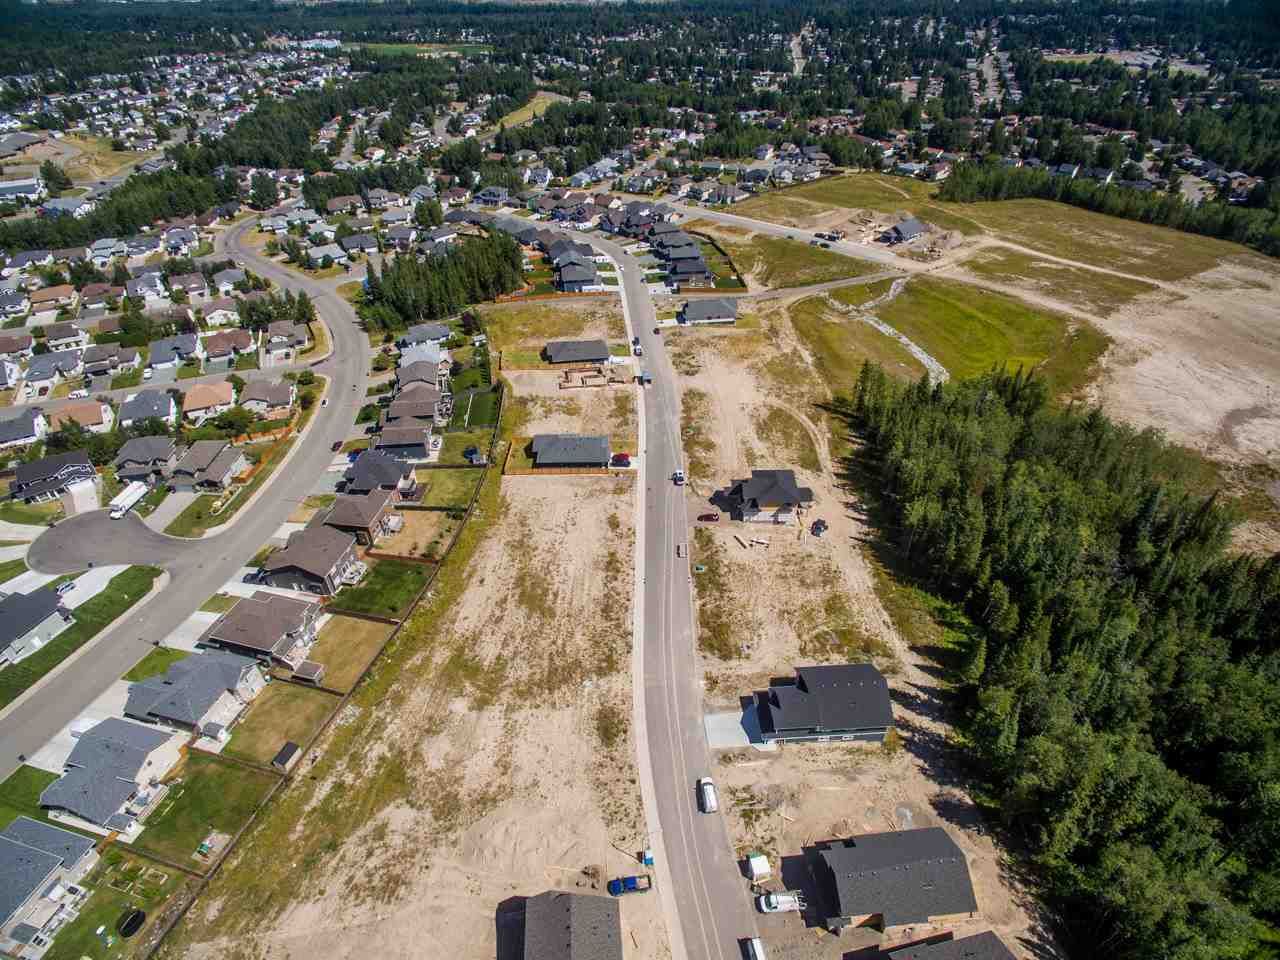 Main Photo: 2845 VISTA RIDGE Drive in Prince George: St. Lawrence Heights Land for sale (PG City South (Zone 74))  : MLS®# R2427596